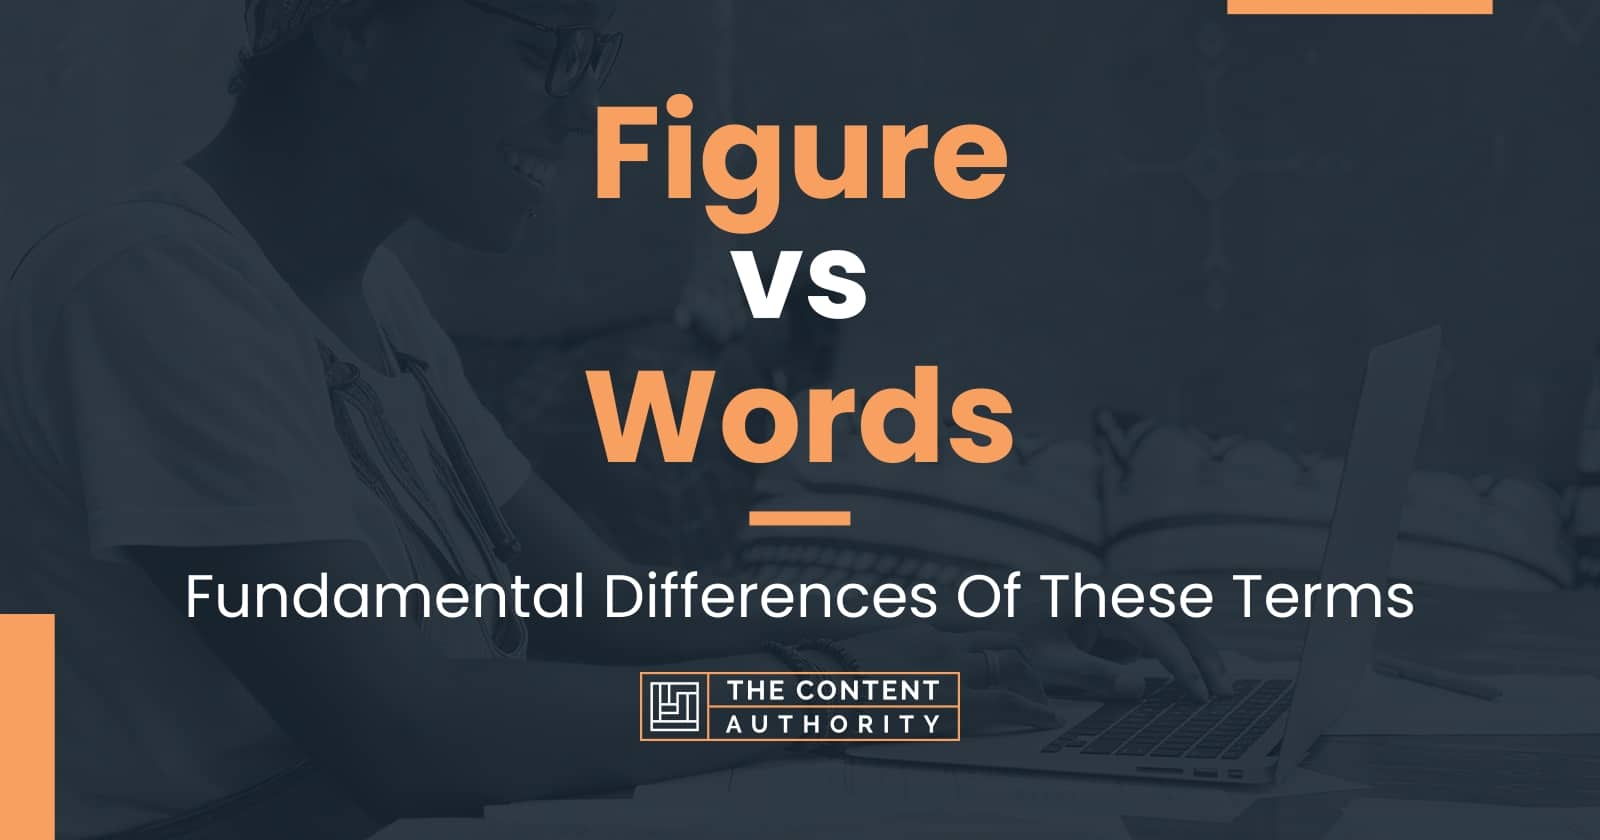 figure-vs-words-fundamental-differences-of-these-terms